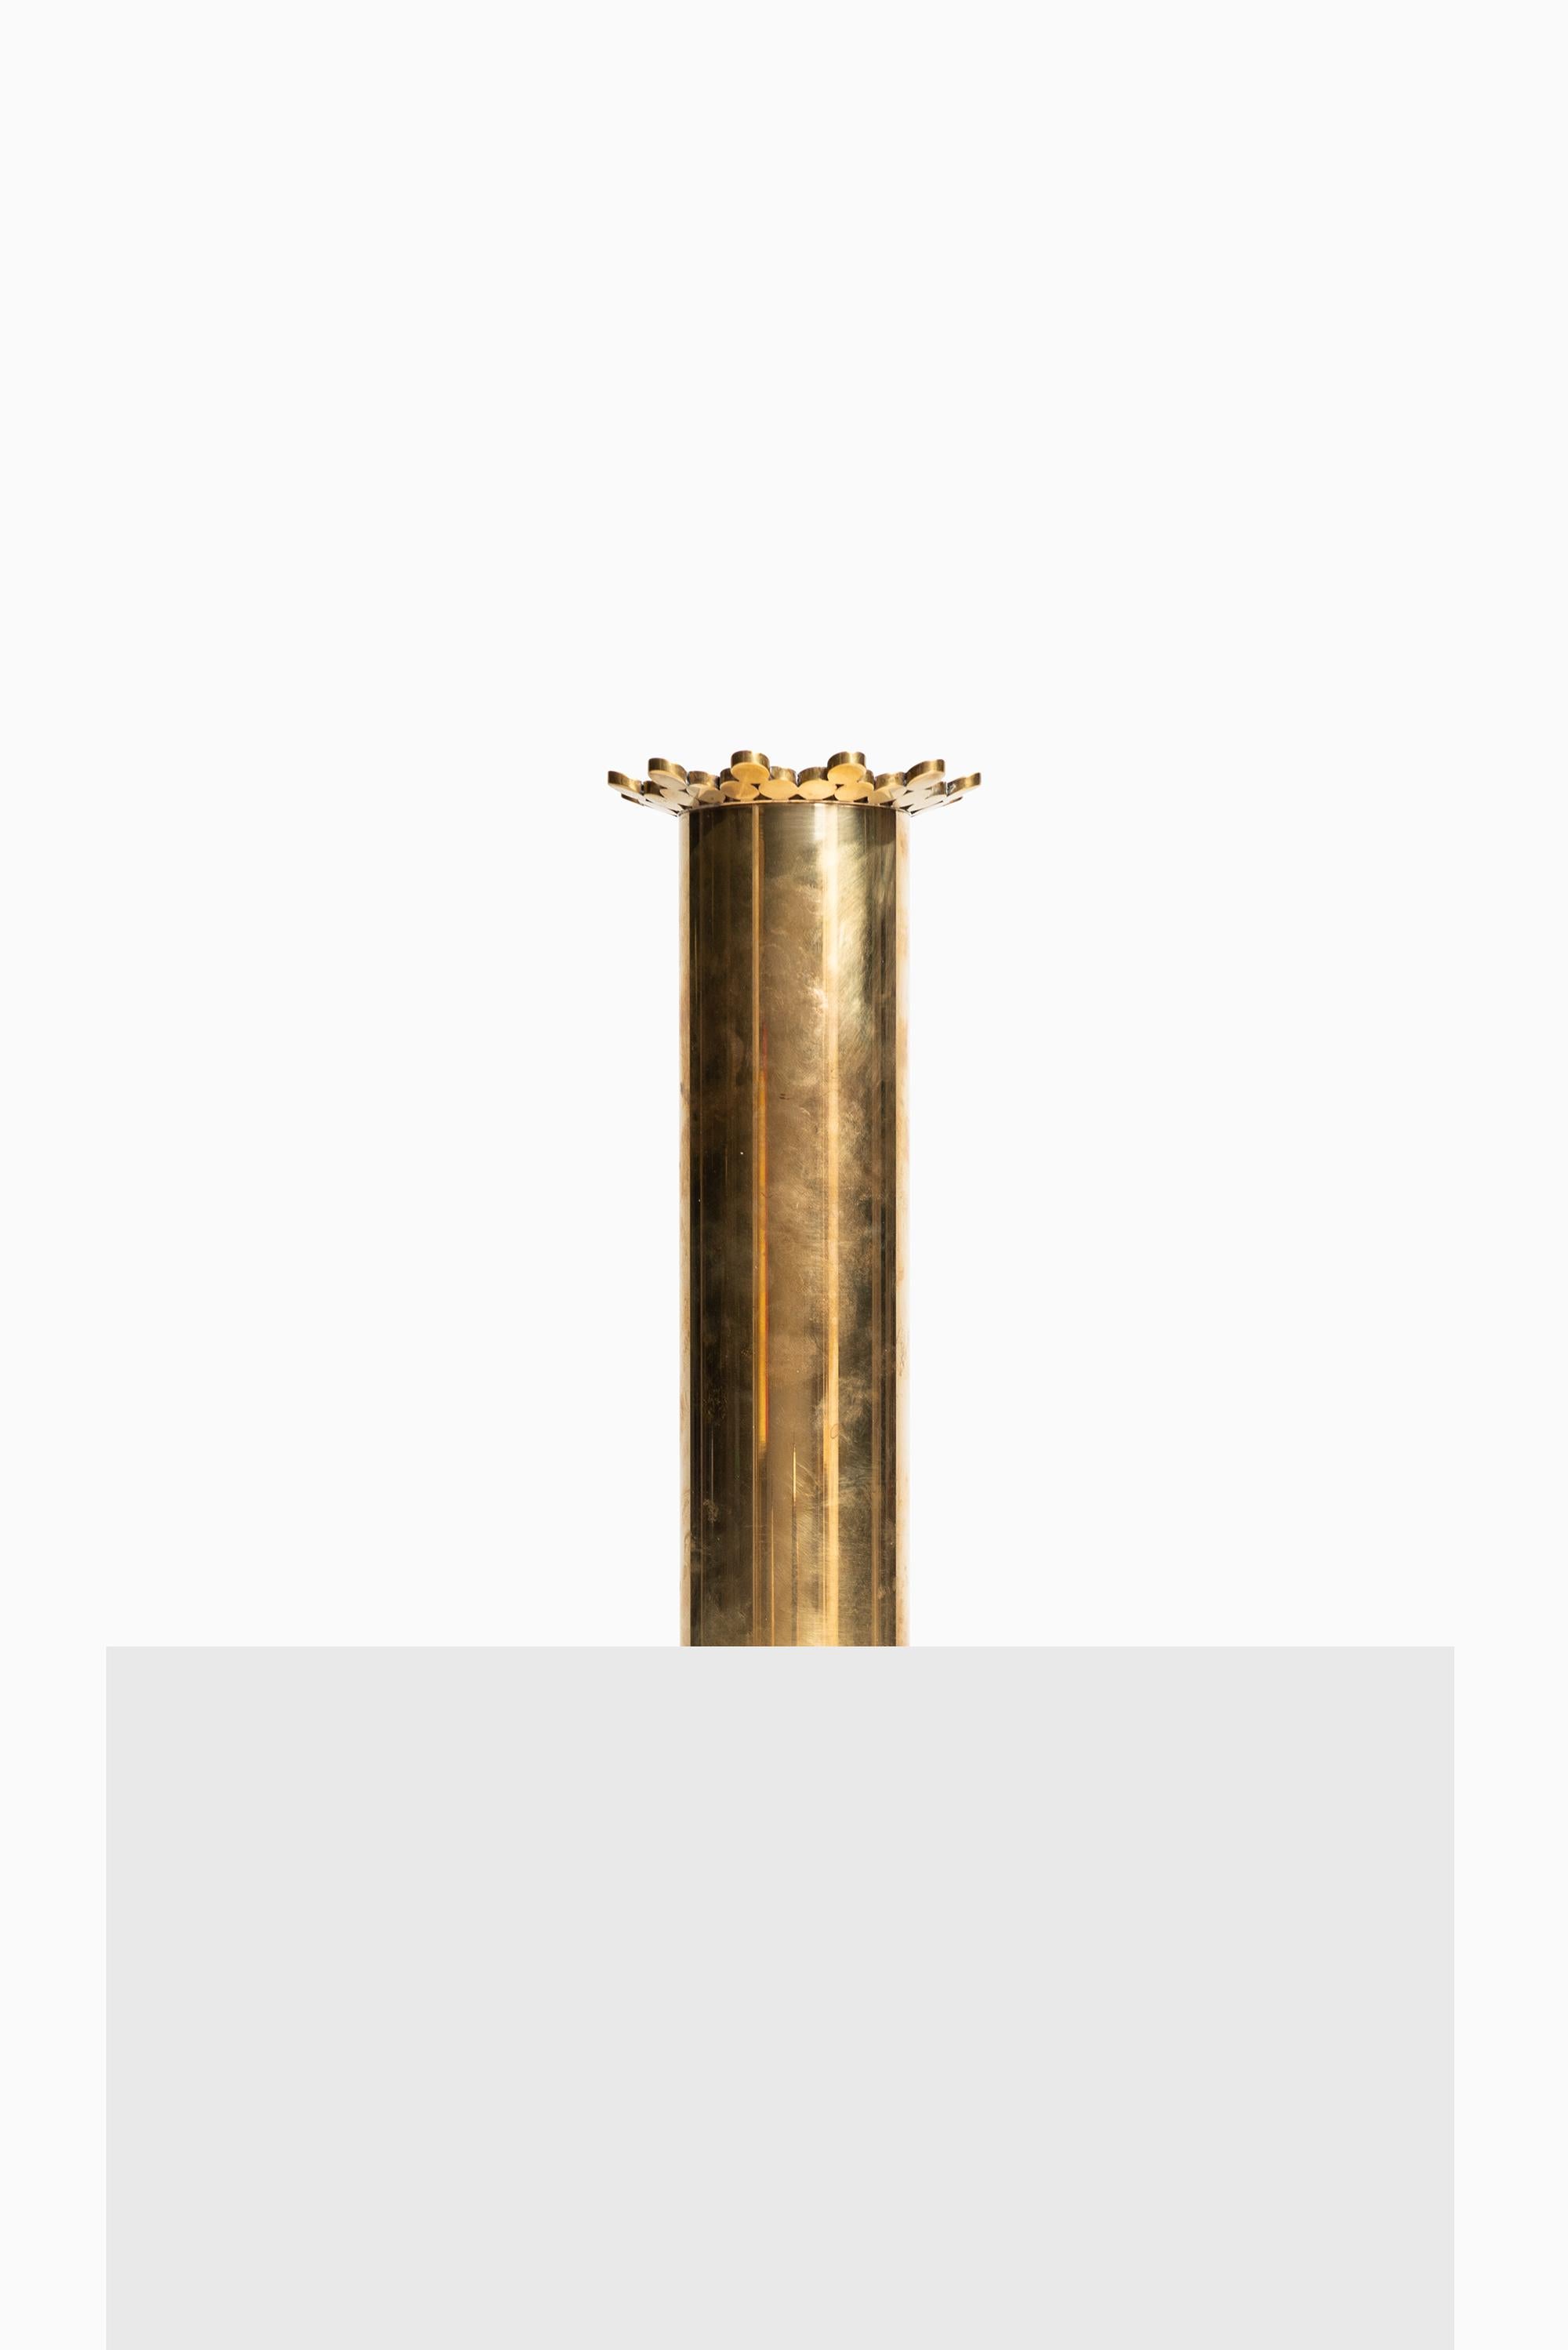 Rare brass vase designed by Pierre Forsell. Produced by Skultuna in Sweden.